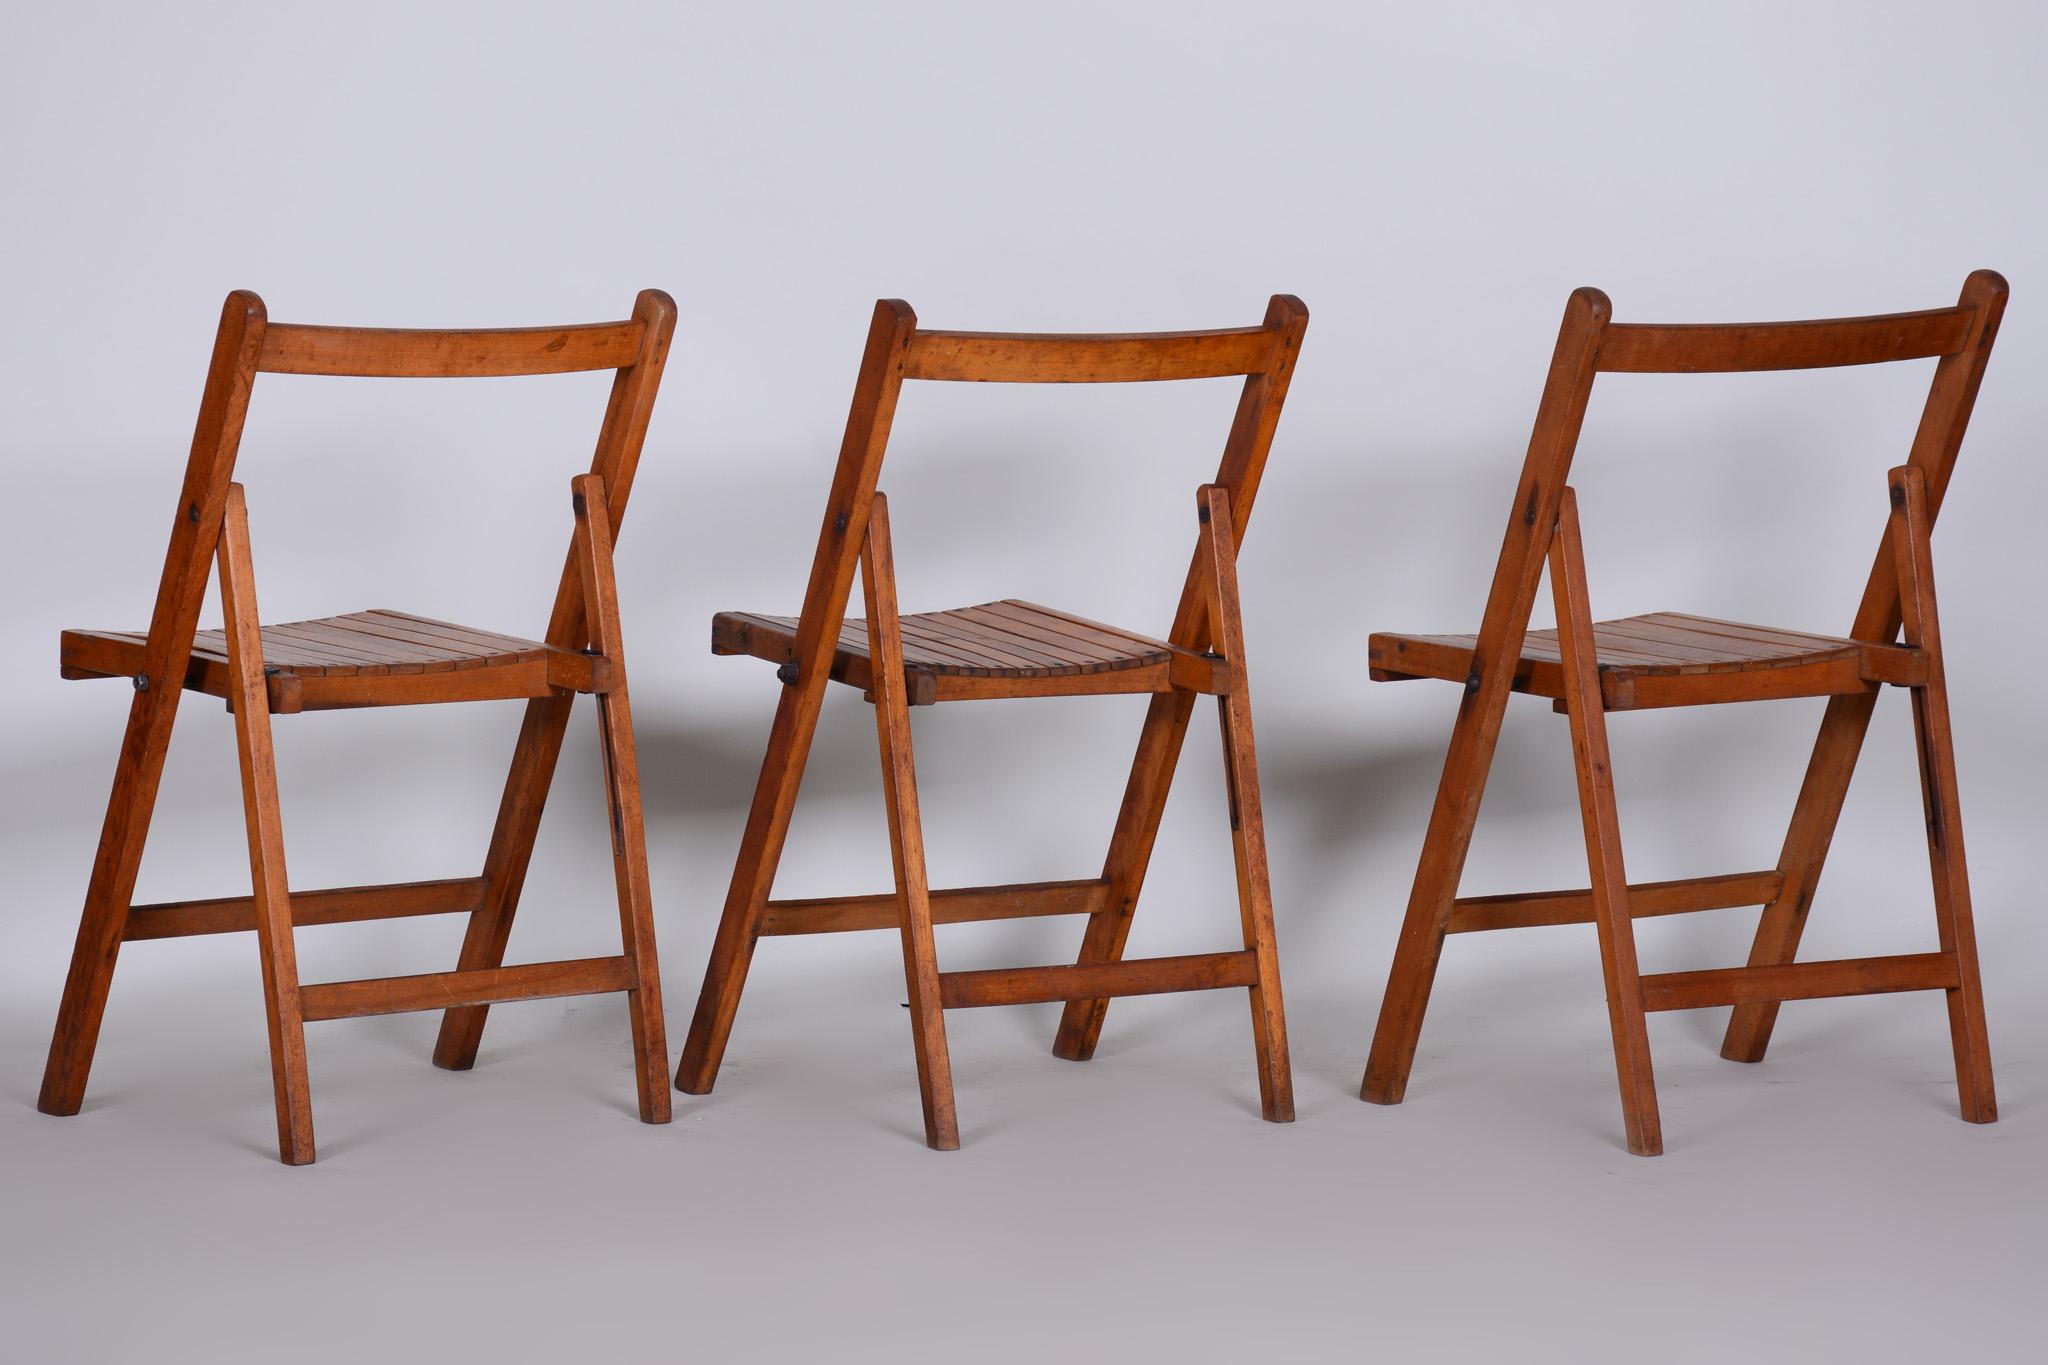 Czech Midcentury Beech Chairs, Original Condition, 1950s, 3 Pieces For Sale 8